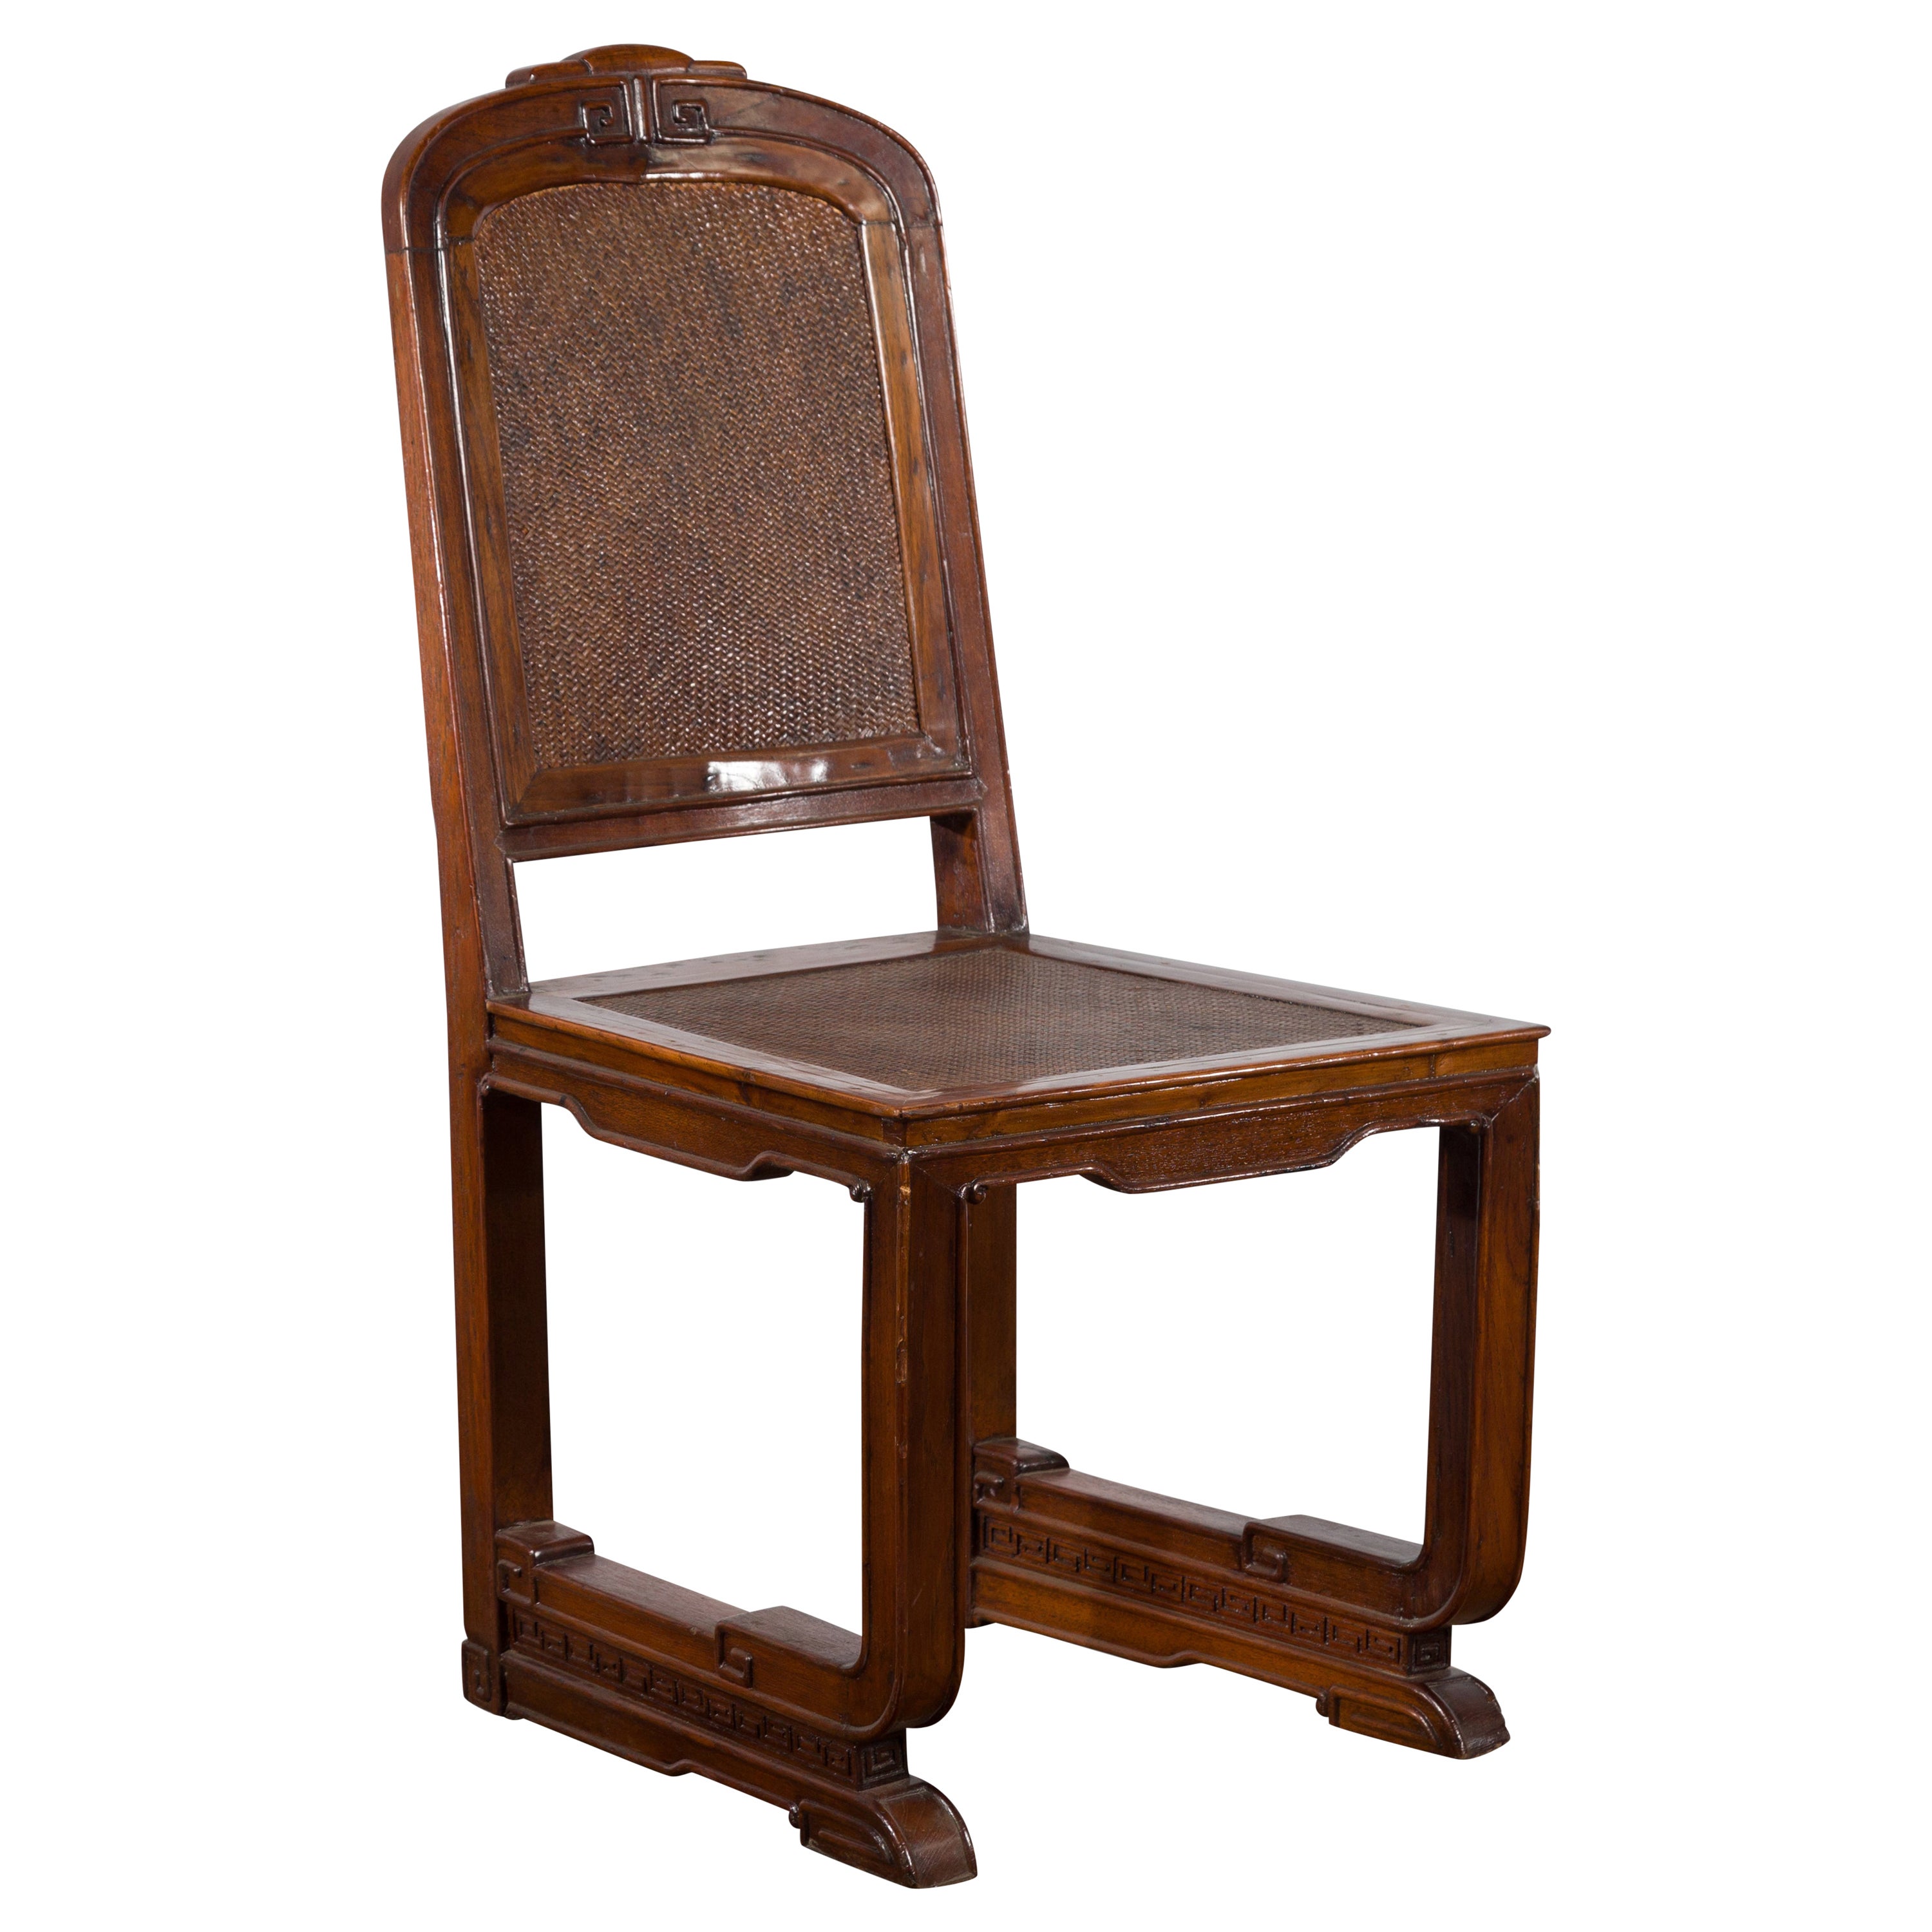 Chinese Qing Dynasty Period 19th Century Wooden Side Chair with Rattan Accents